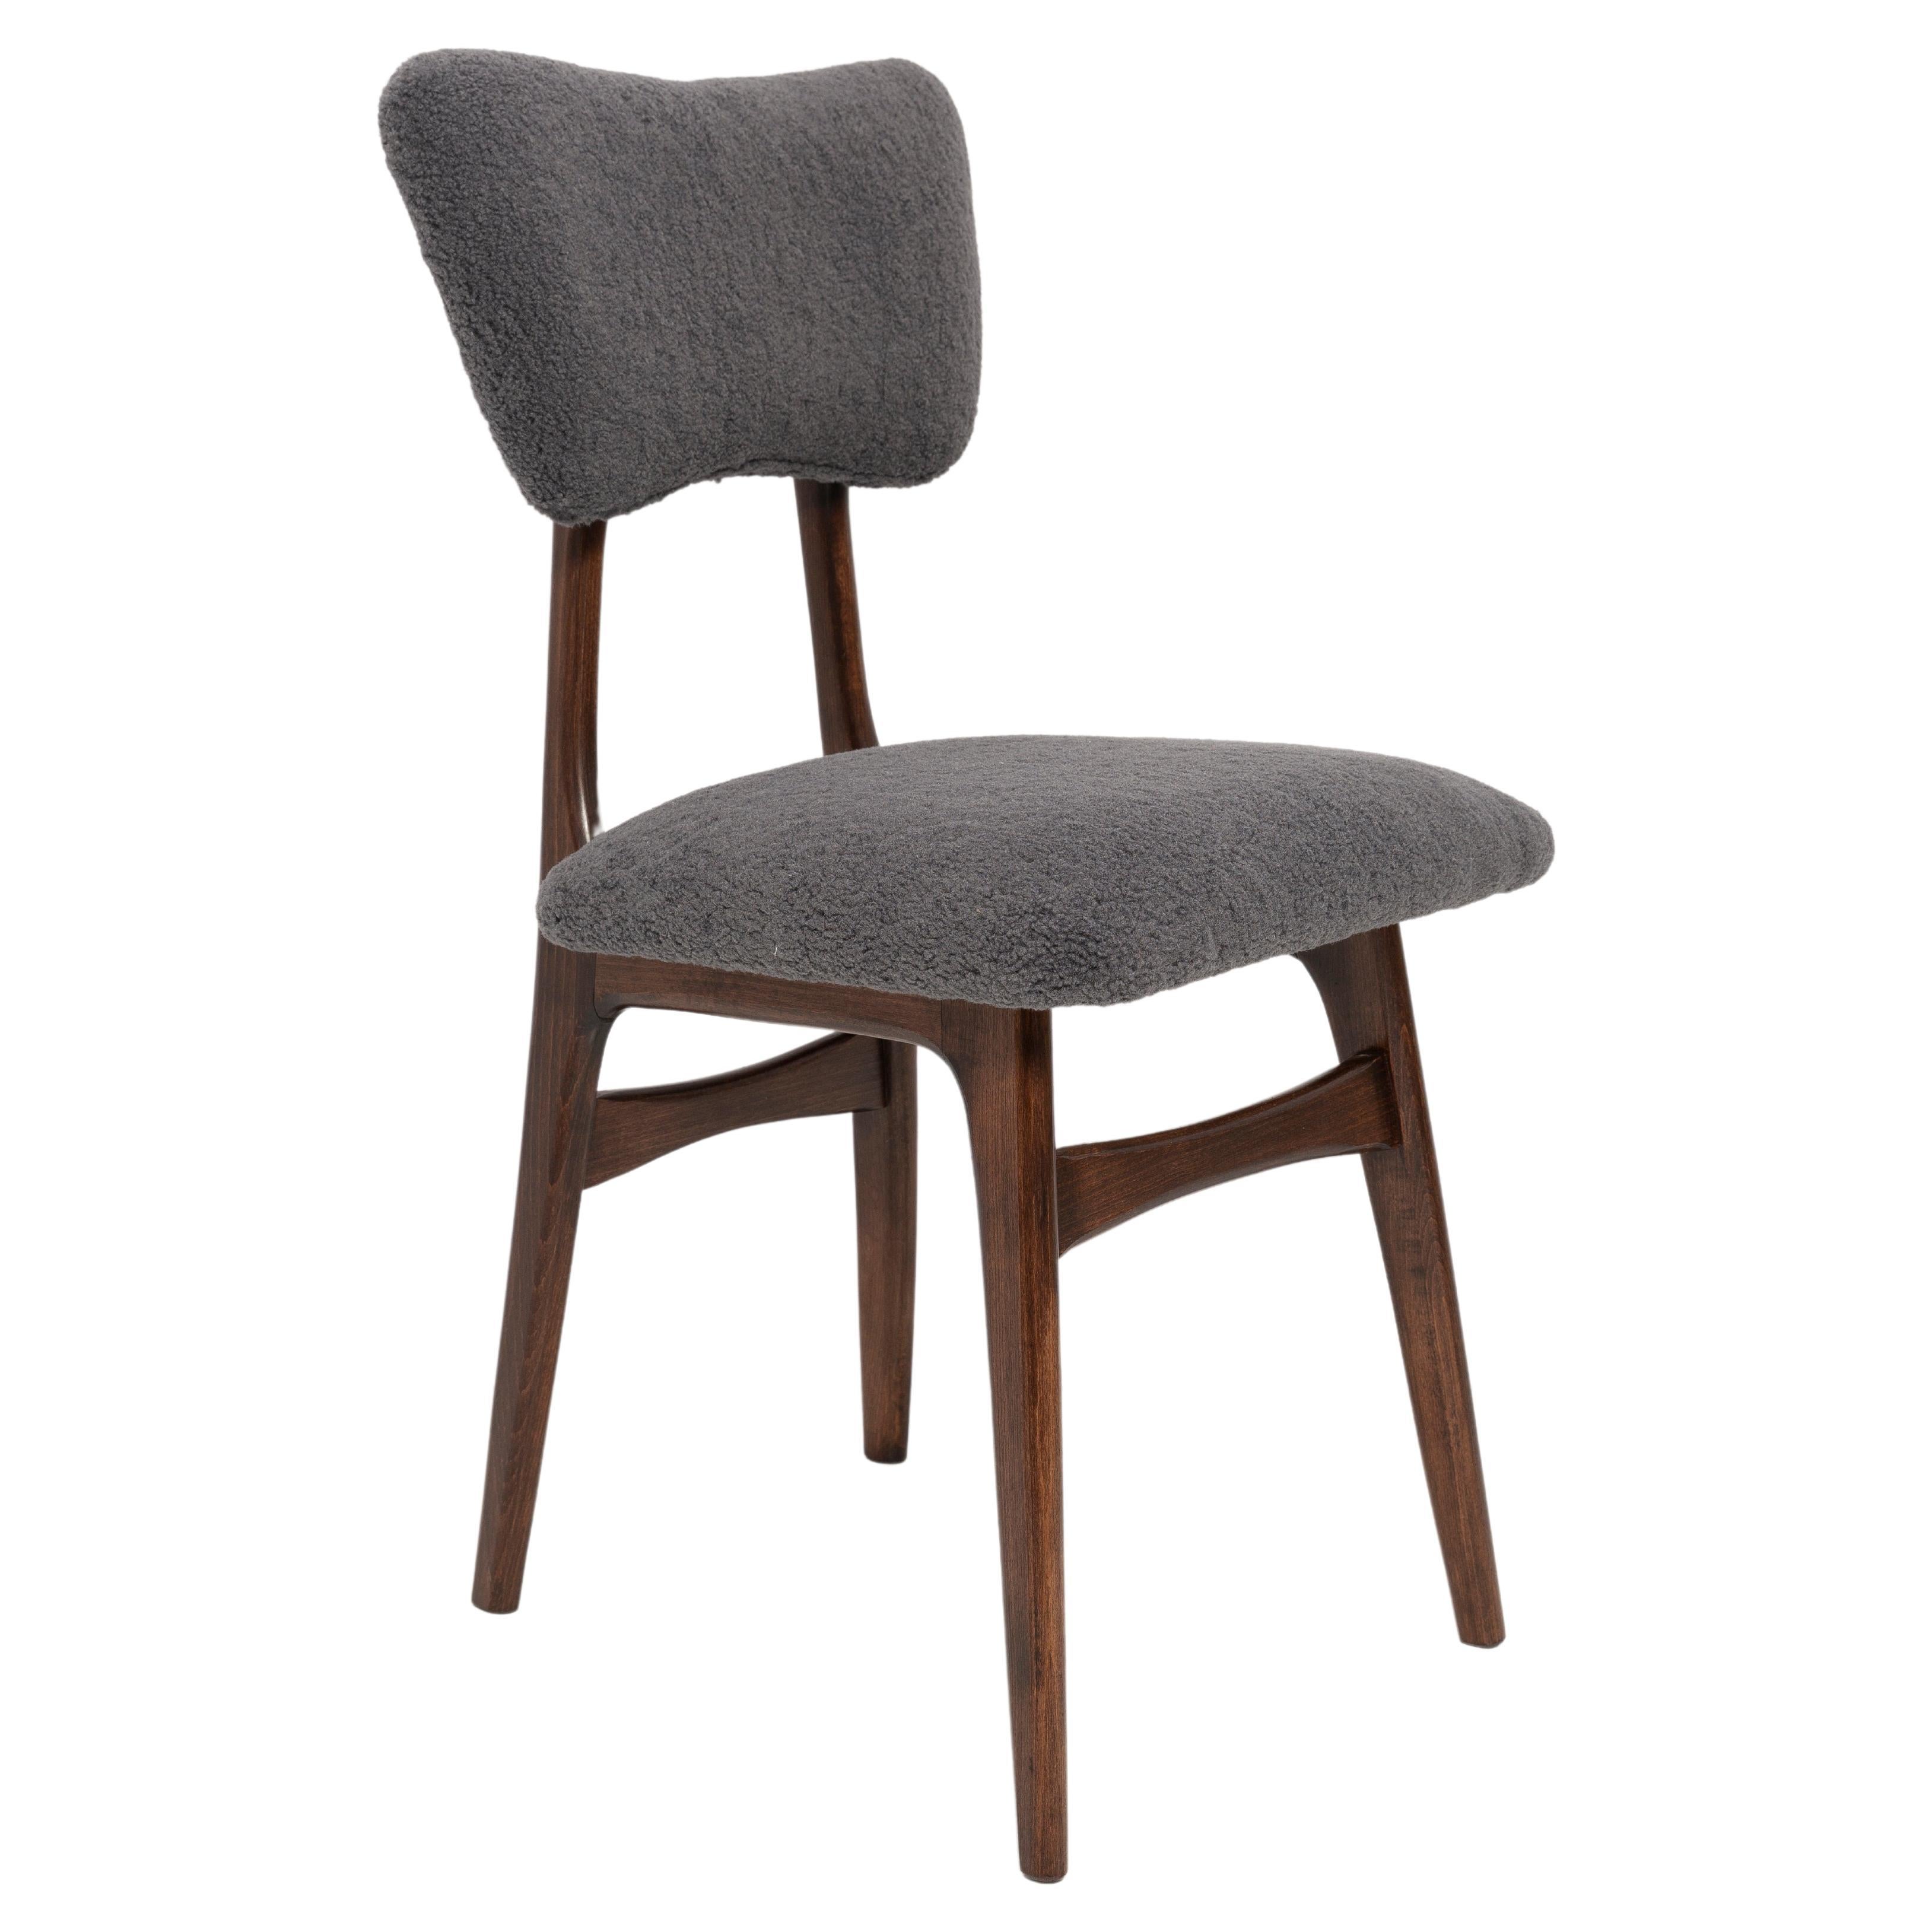 Butterfly Dining Chair, Gray Boucle, Dark Wood, by Vintola Studio, Poland, Europe